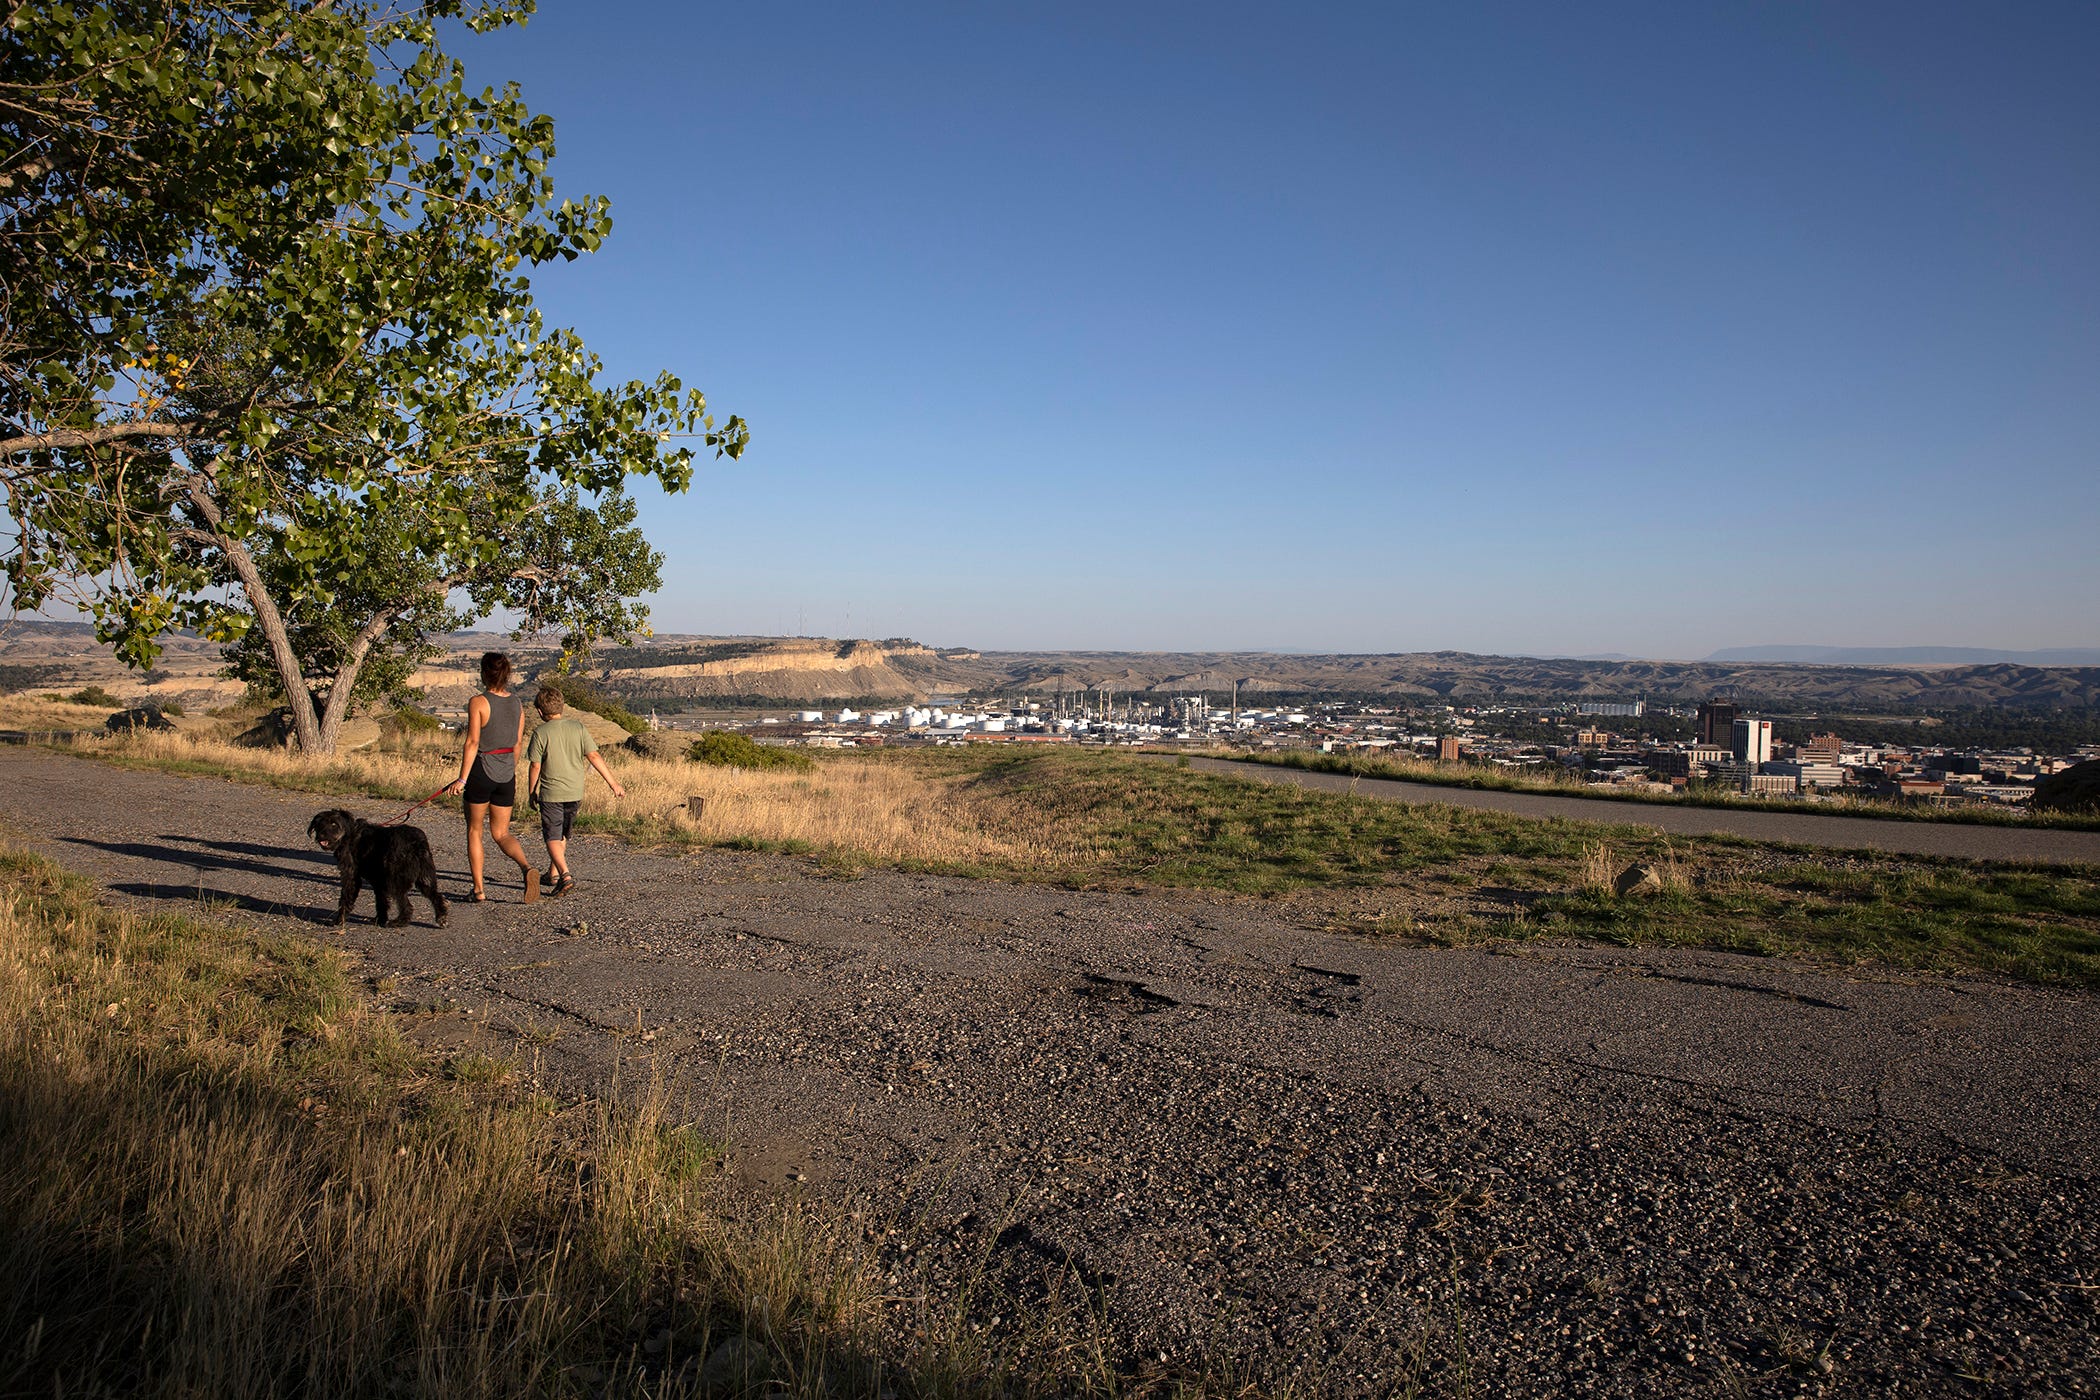 Two people walk their black dog along a hiking trail which overlooks Billings, Montana under a dark blue sky.